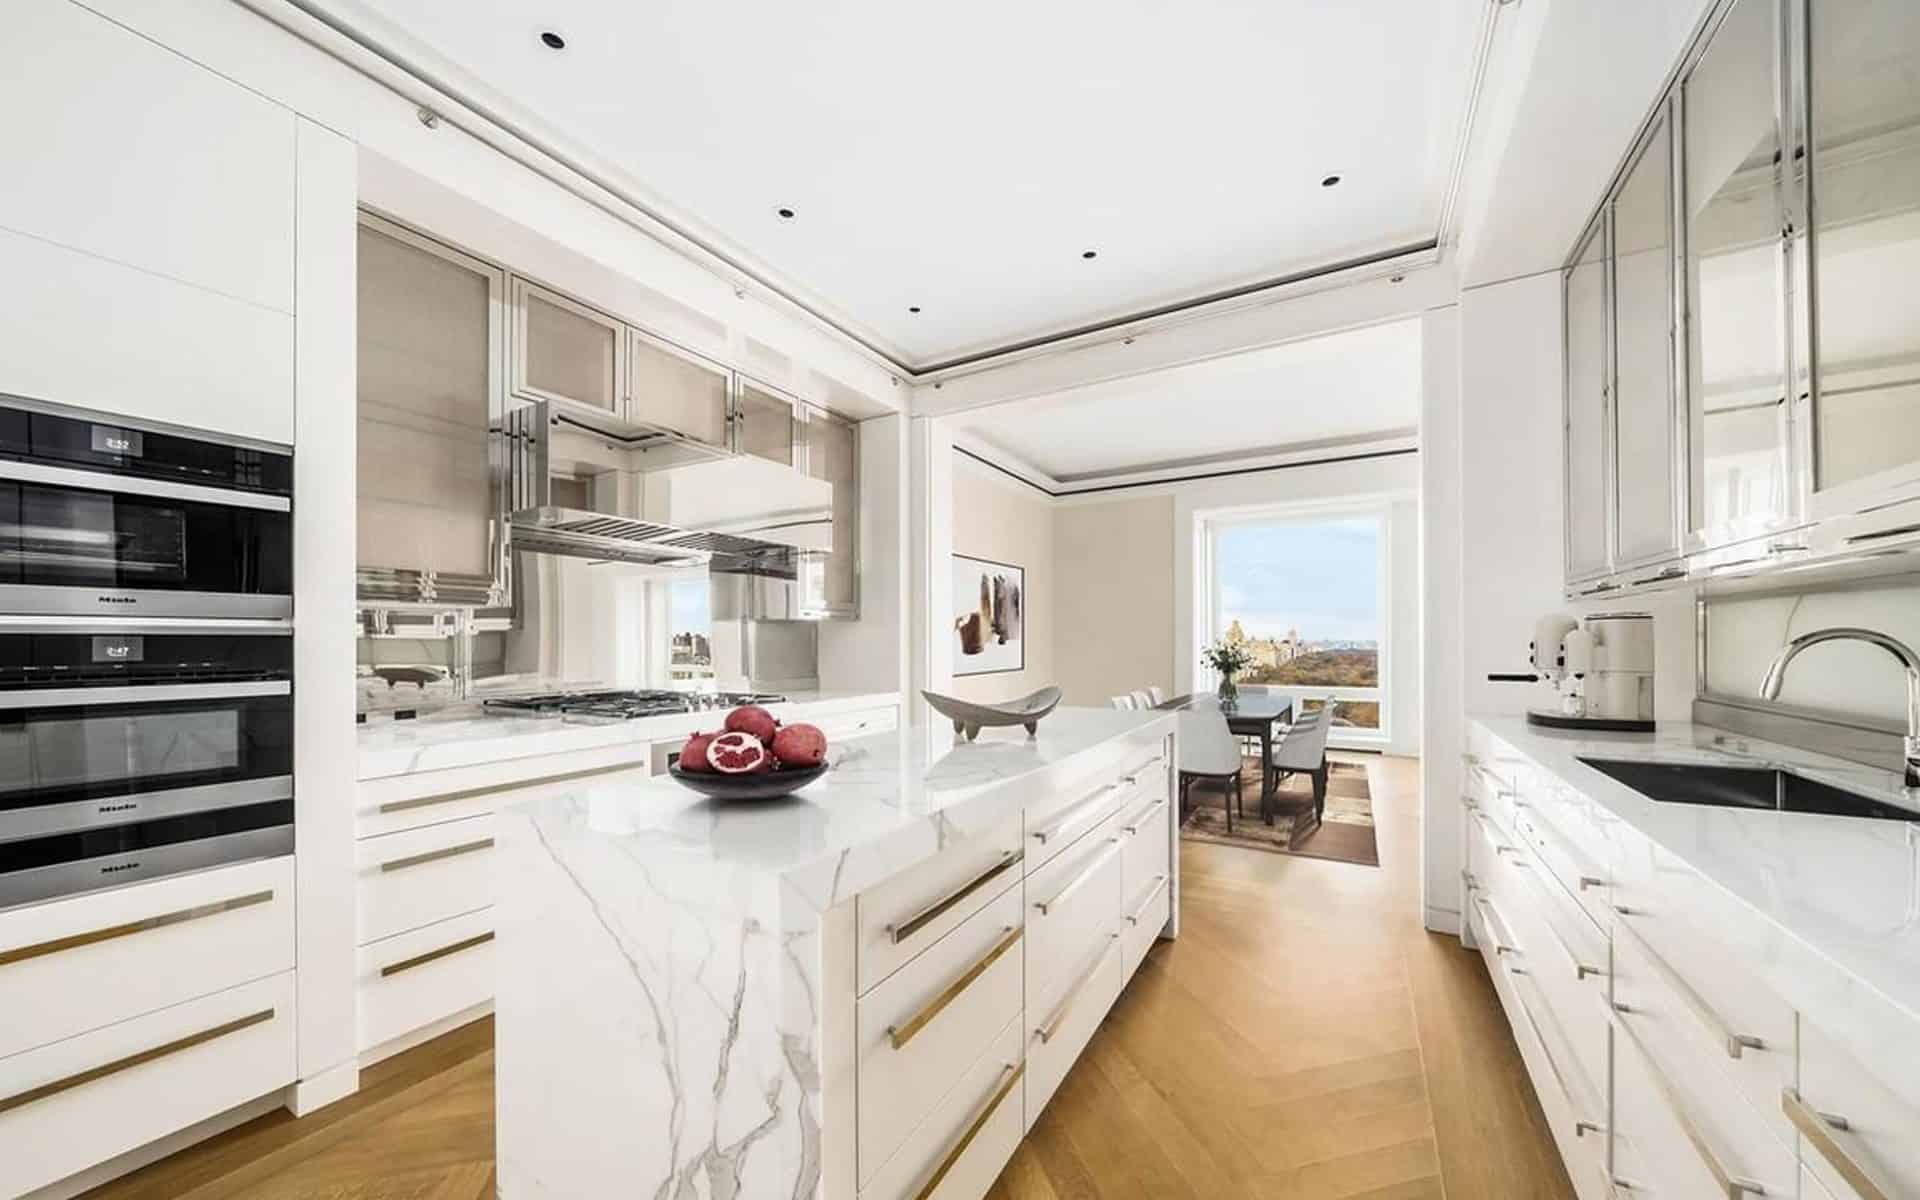 Sleek condominium kitchen features custom marble island, custom white cabinetry with chrome accents and glass front cabinets.